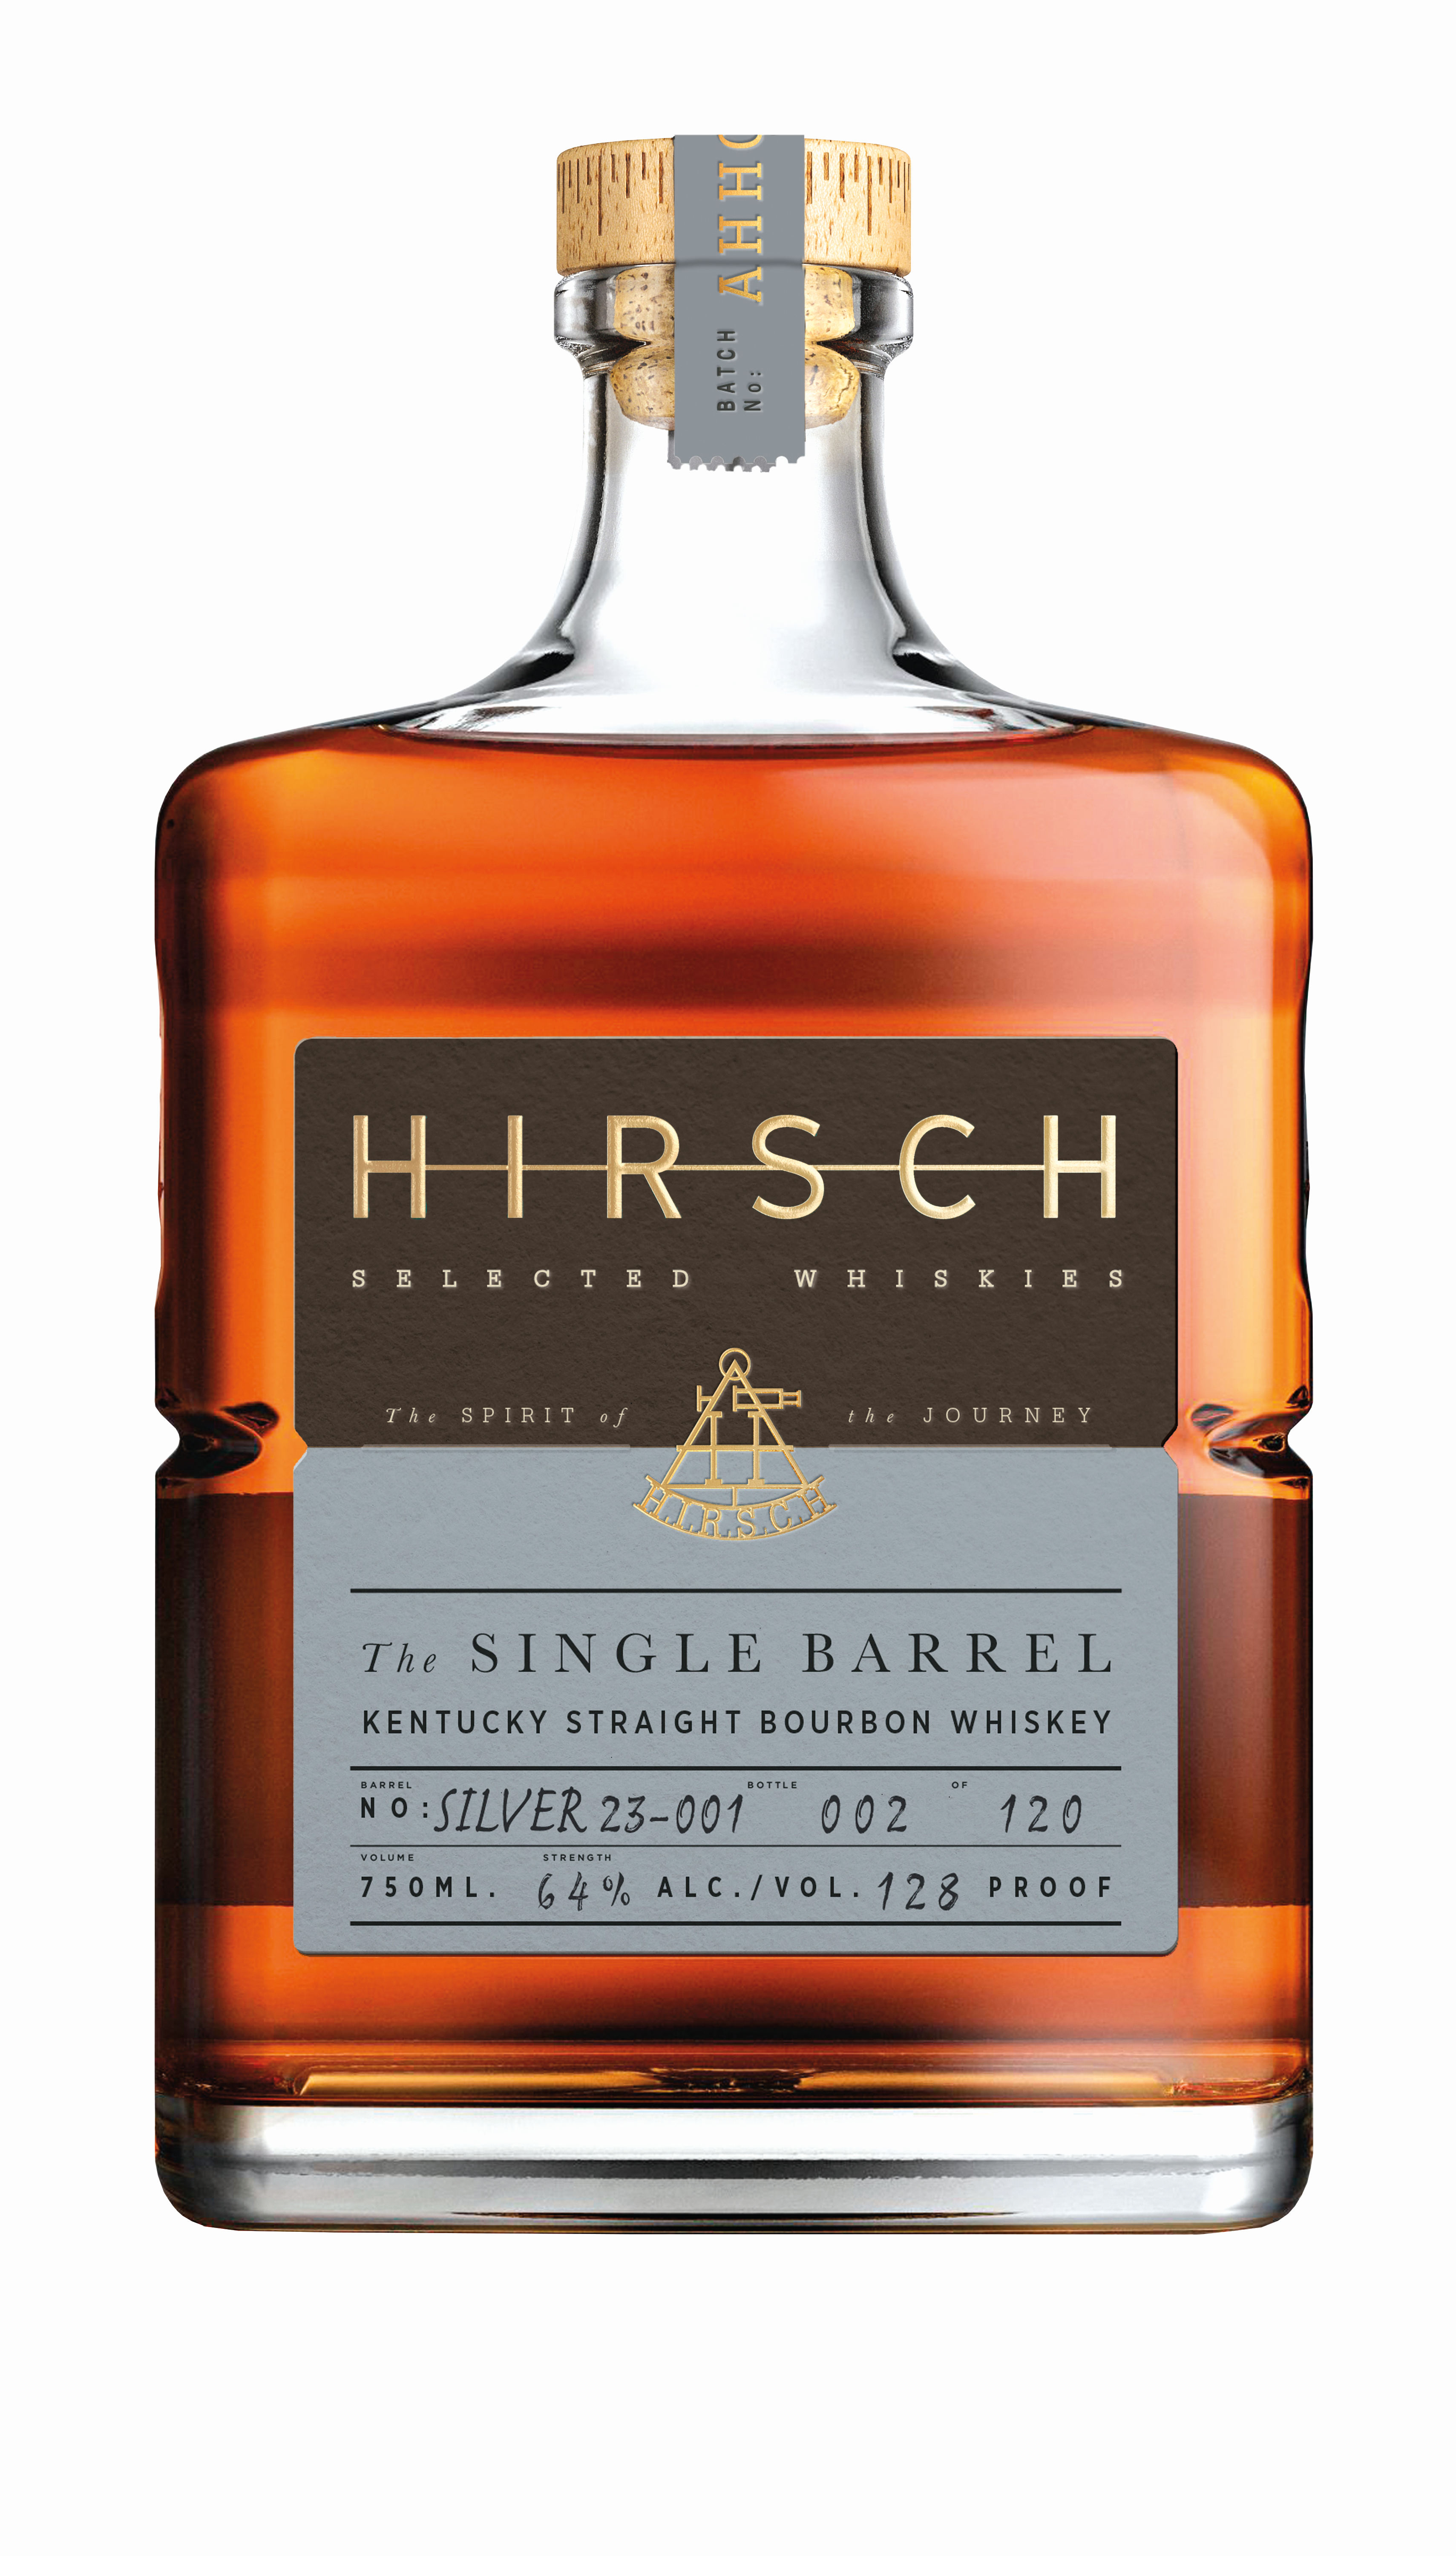 HIRSCH Selected Whiskeys Releases New Bottles For The Holidays